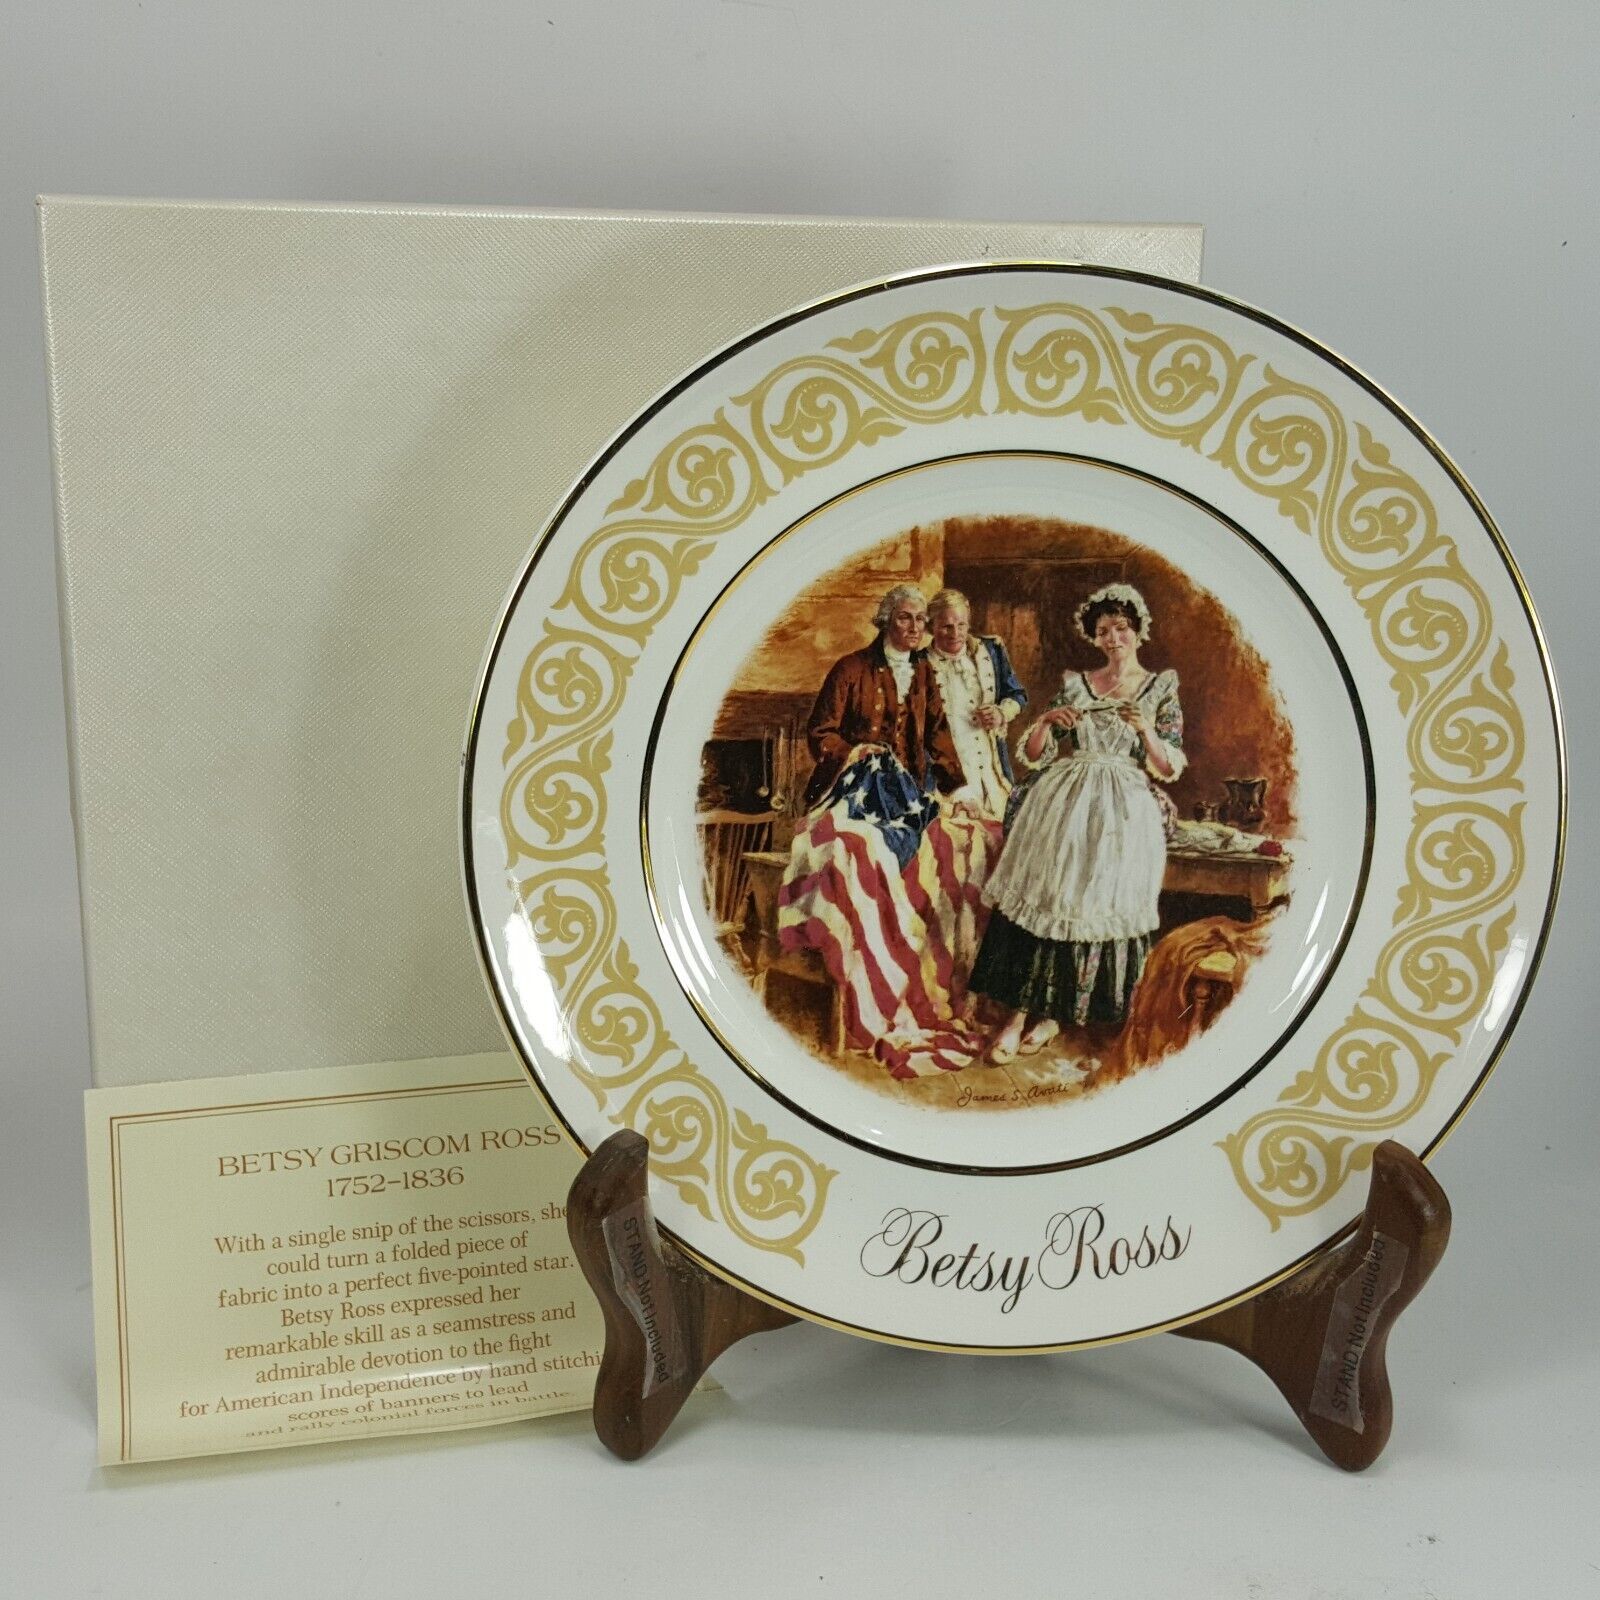 Primary image for Vintage 1973 Collector's  Plate "BETSY ROSS" Plate by Avon 8.75" Wedgwood XBHEU